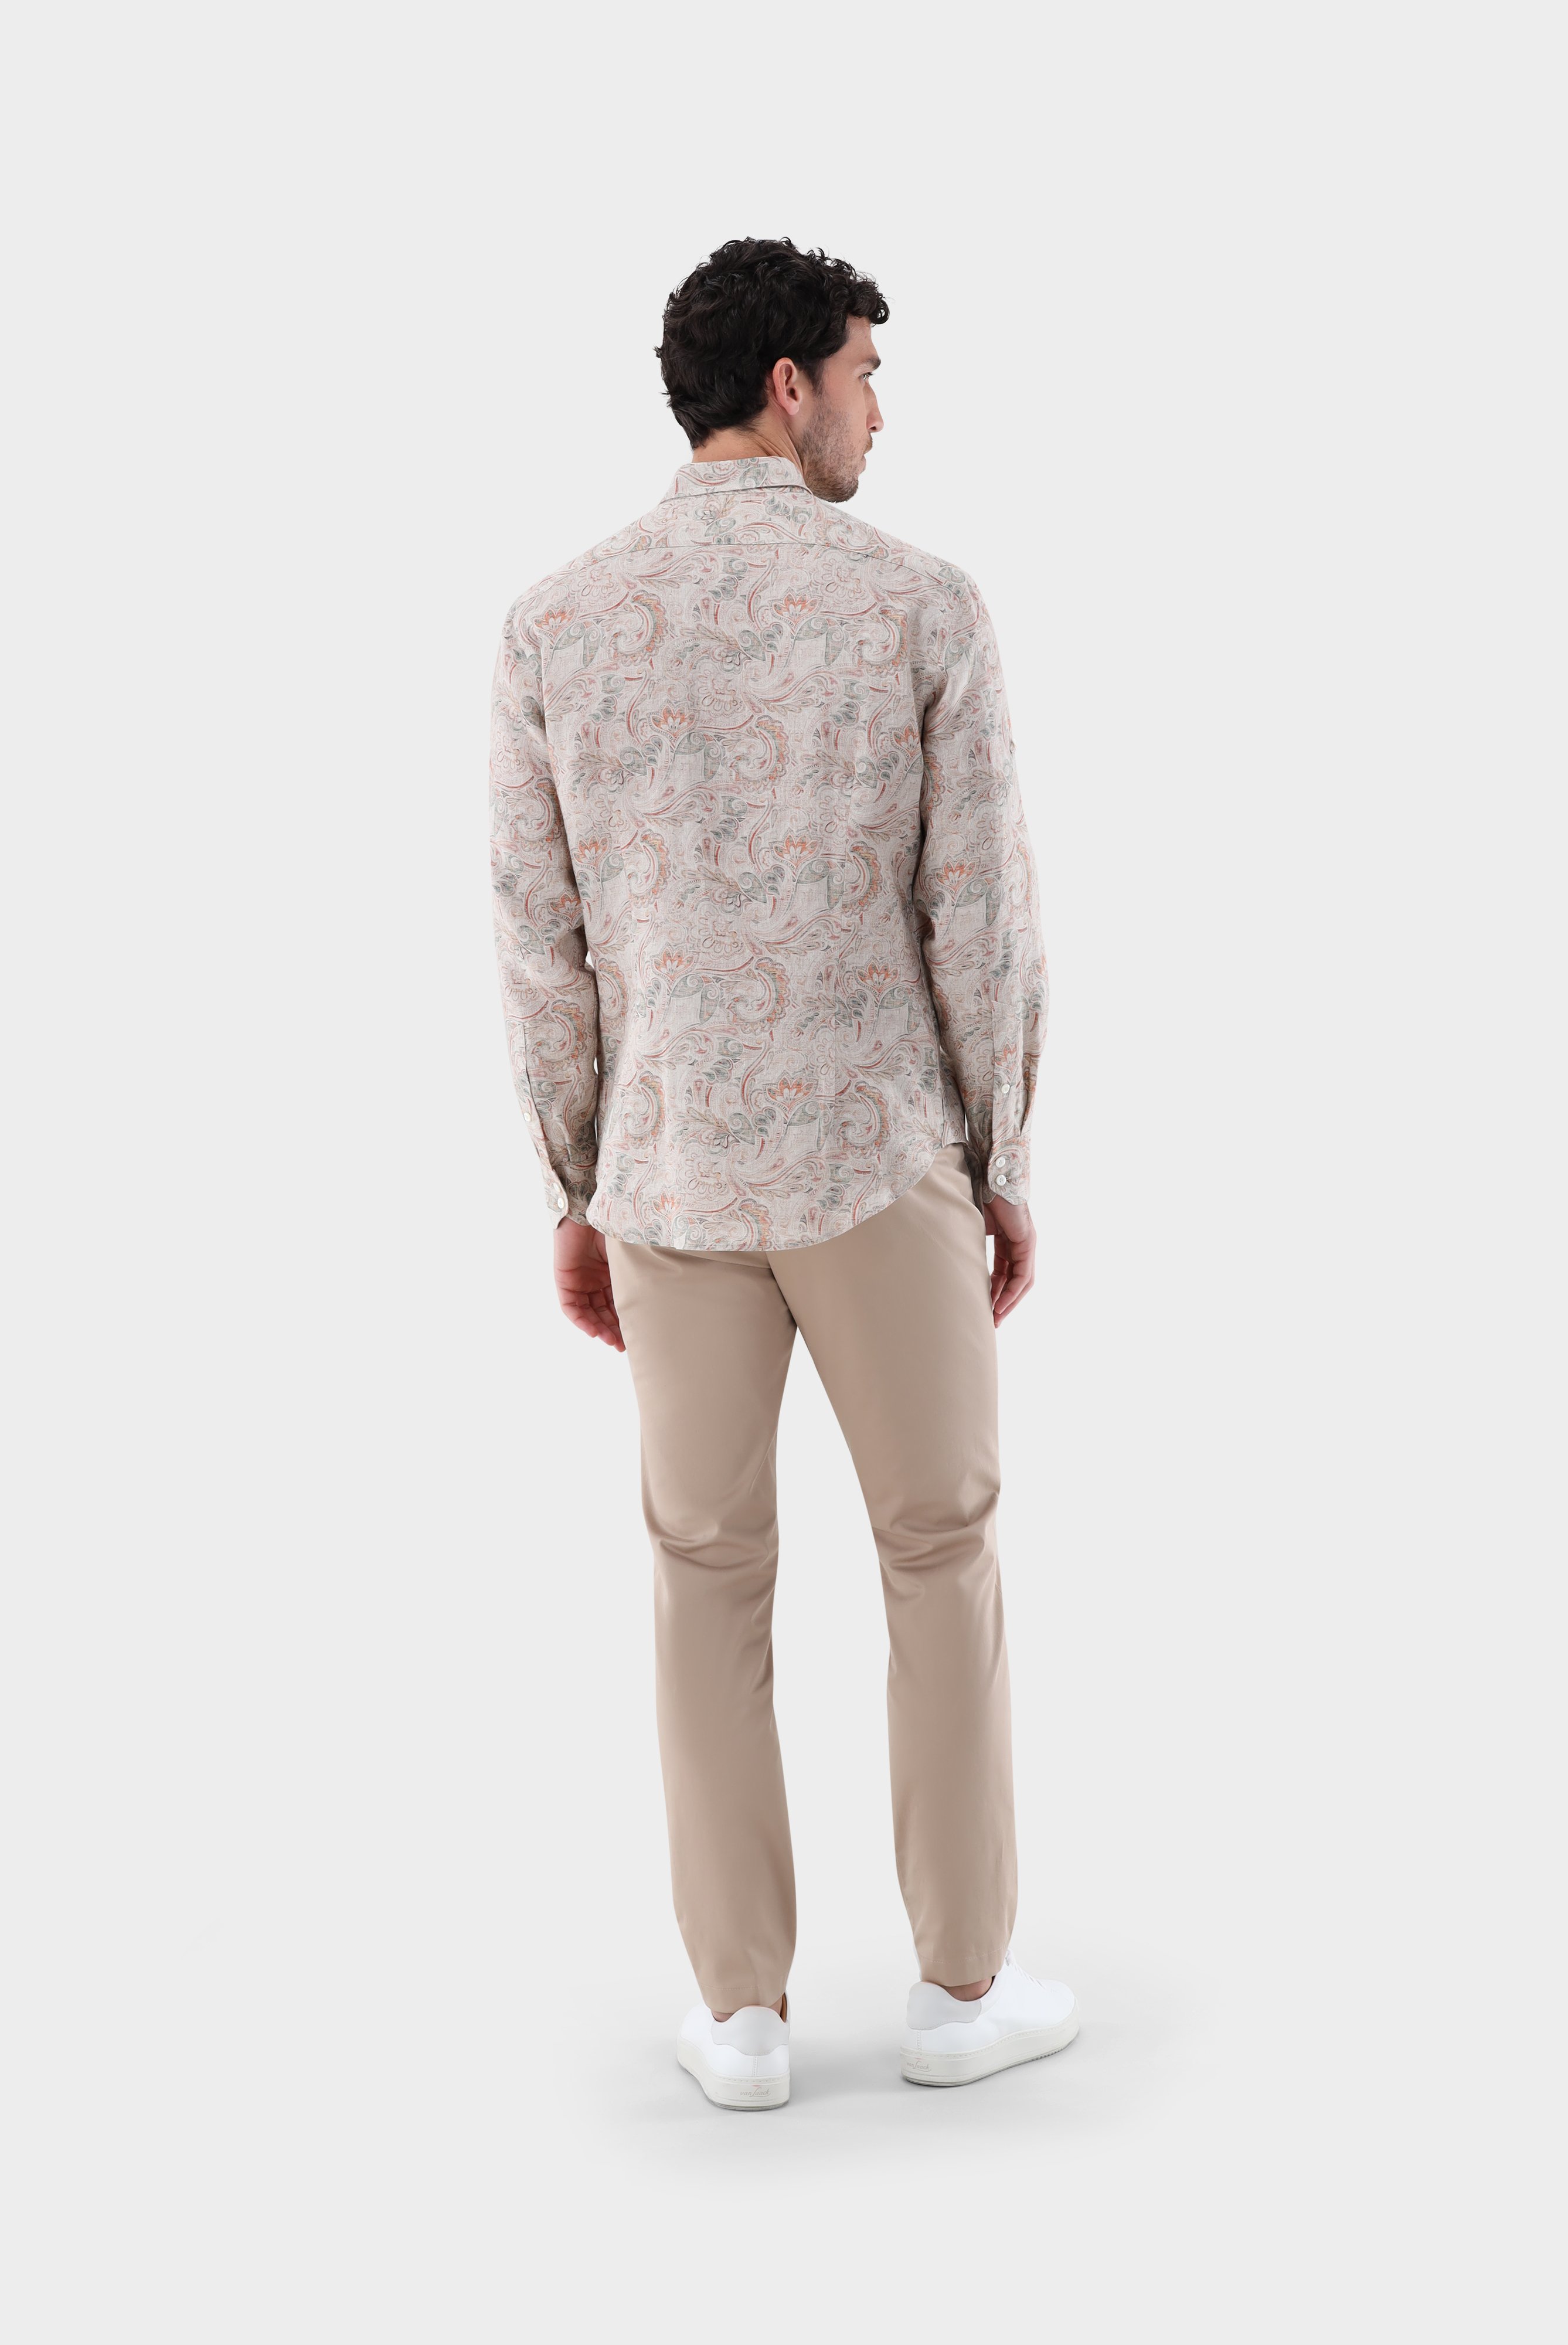 Casual Shirts+Linen Paisley-Printed Shirt Tailor Fit+20.2013.C4.172036.113.38